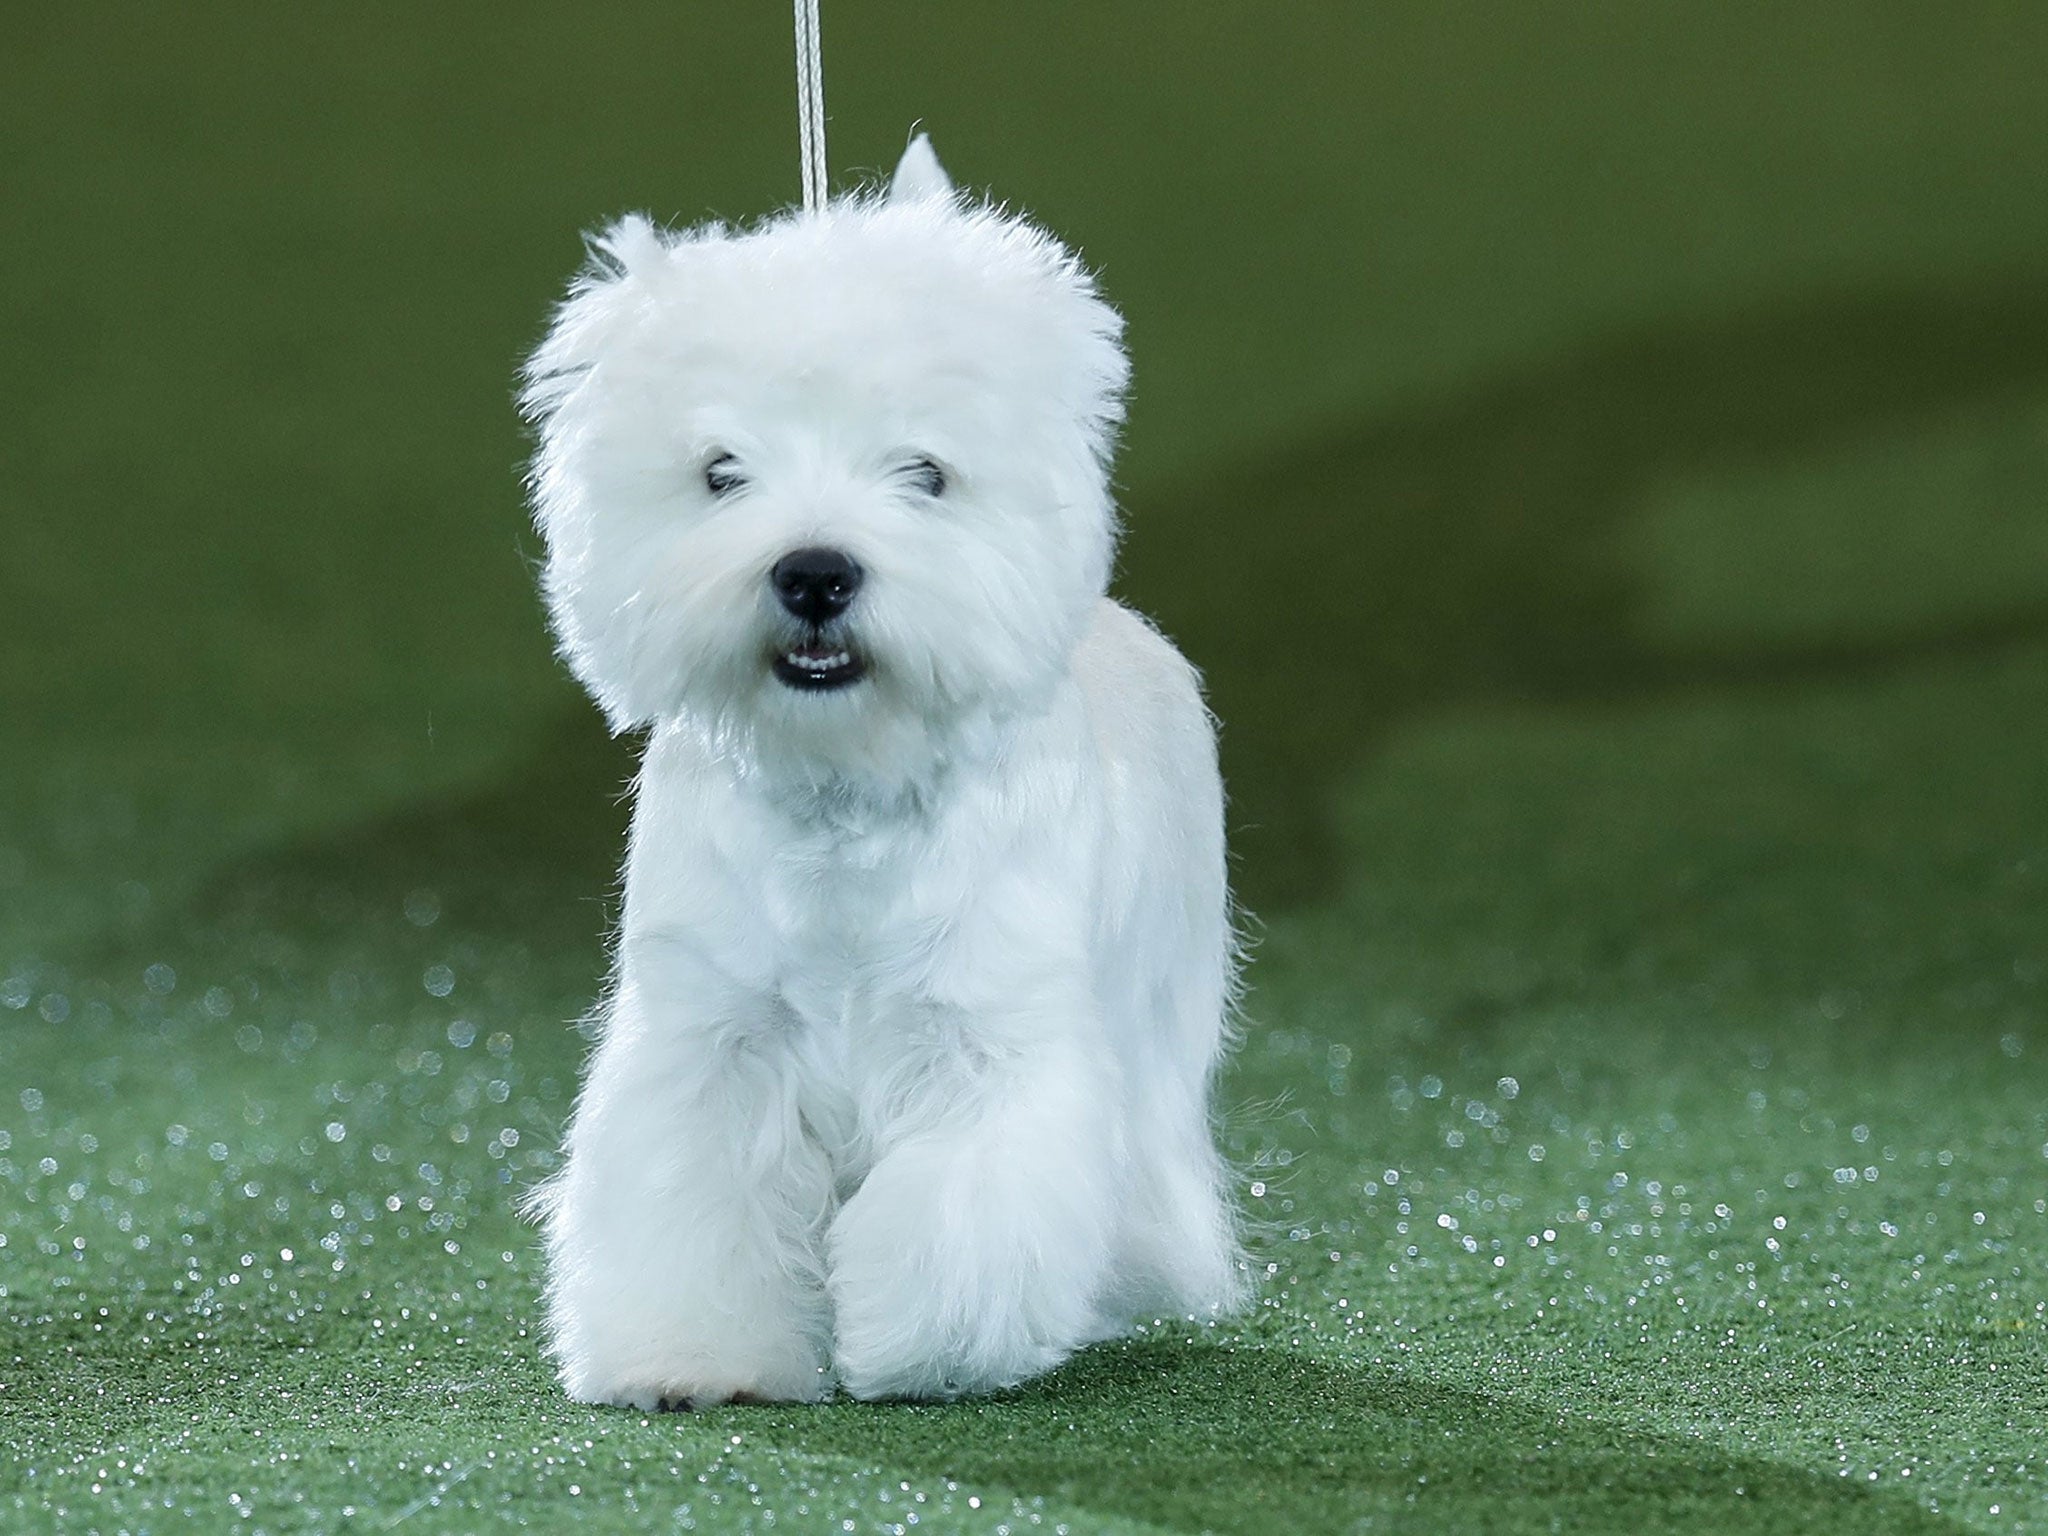 Handler Marie Burns (unseen) shows Devon, the West Highland White Terrier, after winning Best in Show on the final day of the Crufts Dog Show in Birmingham, Britain March 13, 2016